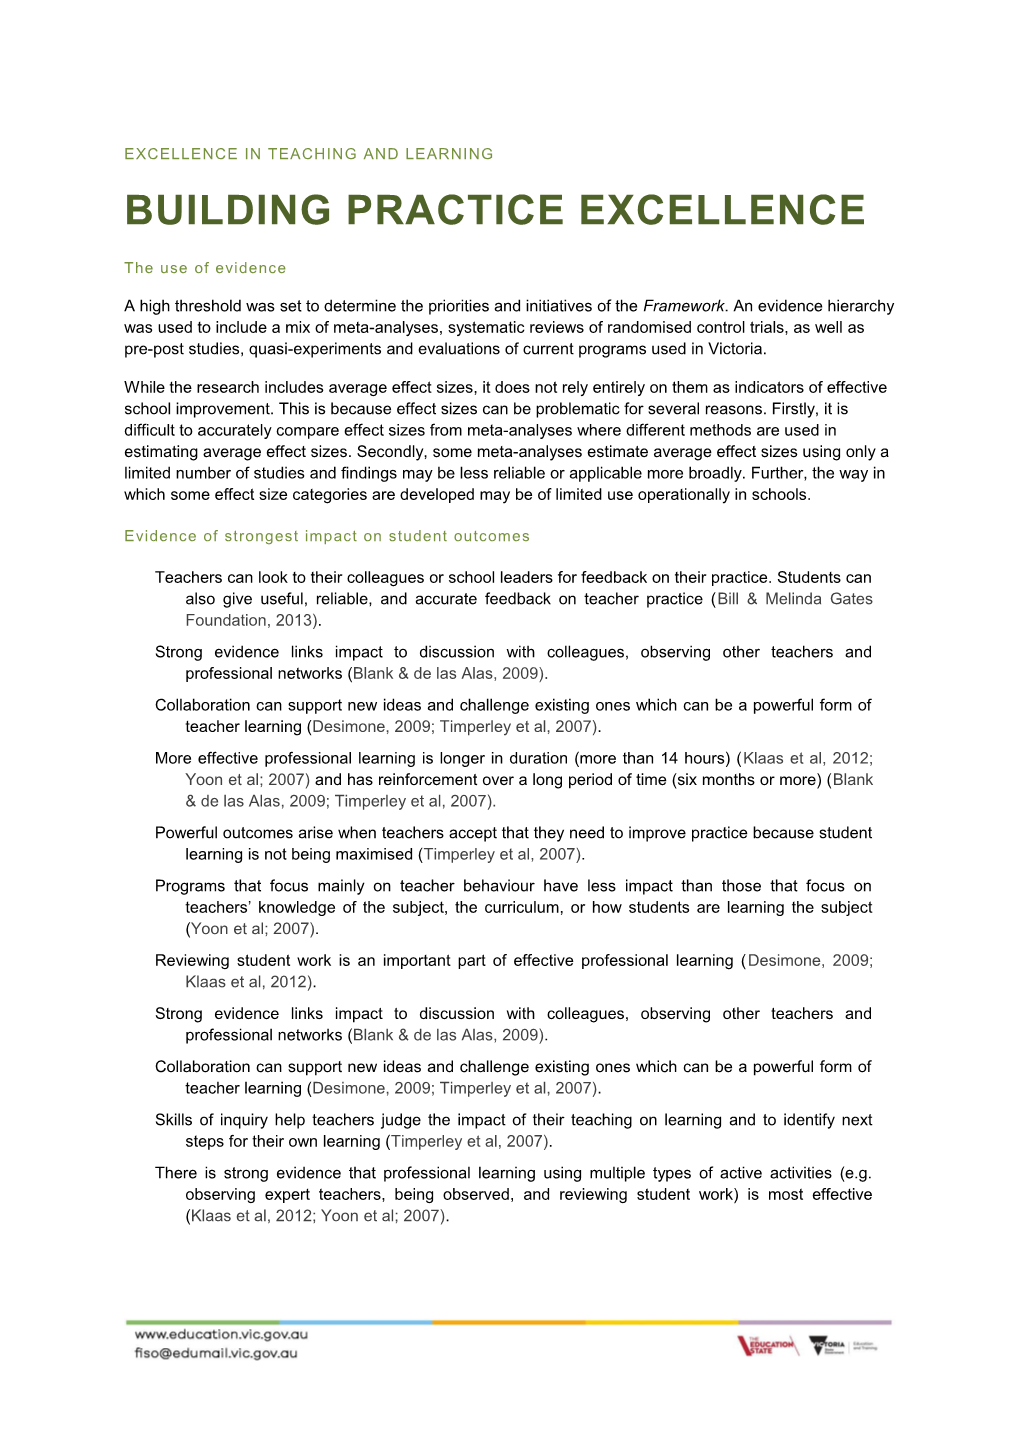 Excellence in Teaching and Learning